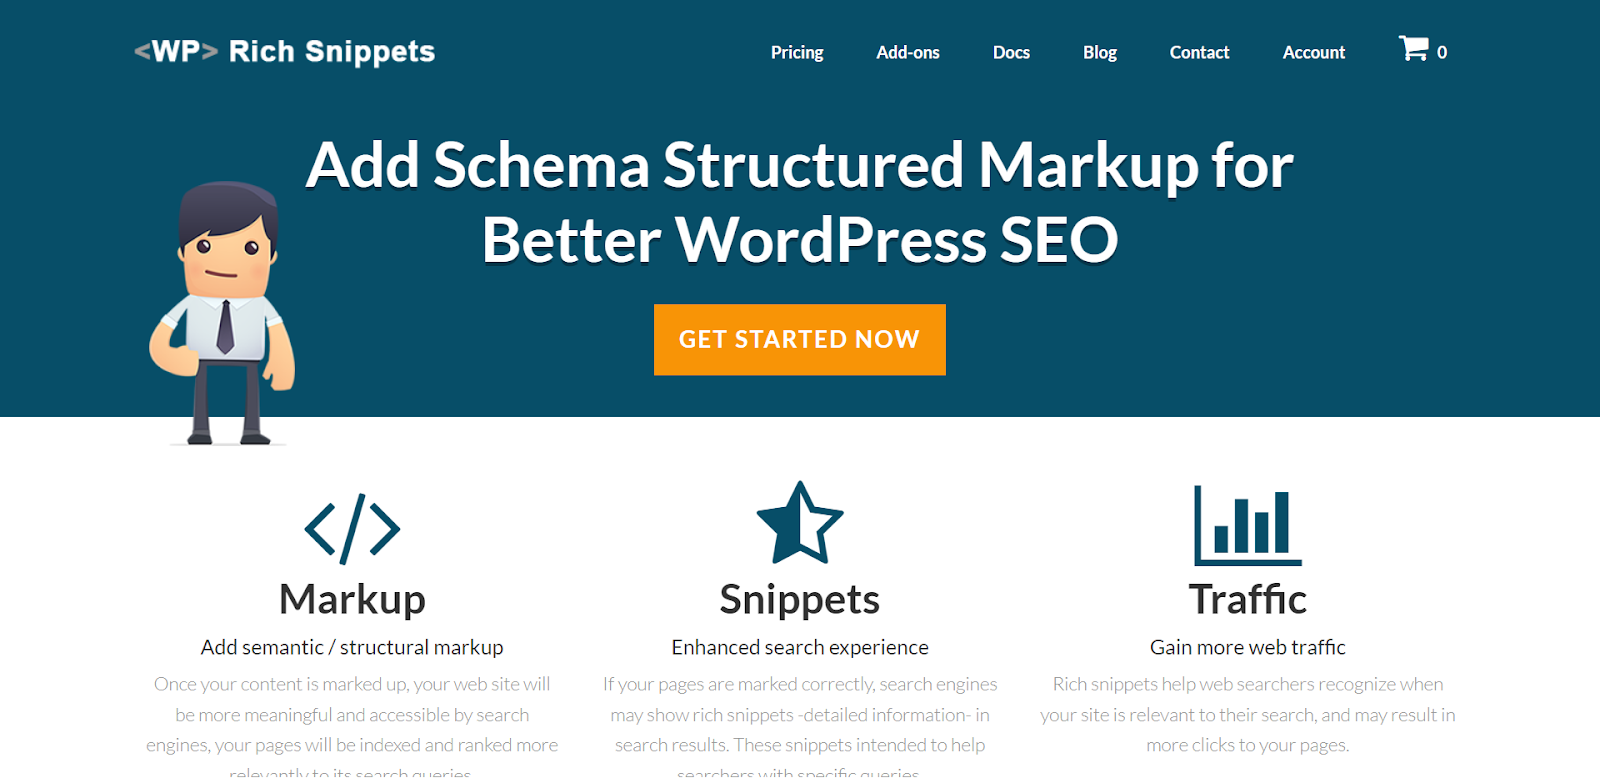 WP Rich Snippets plugins